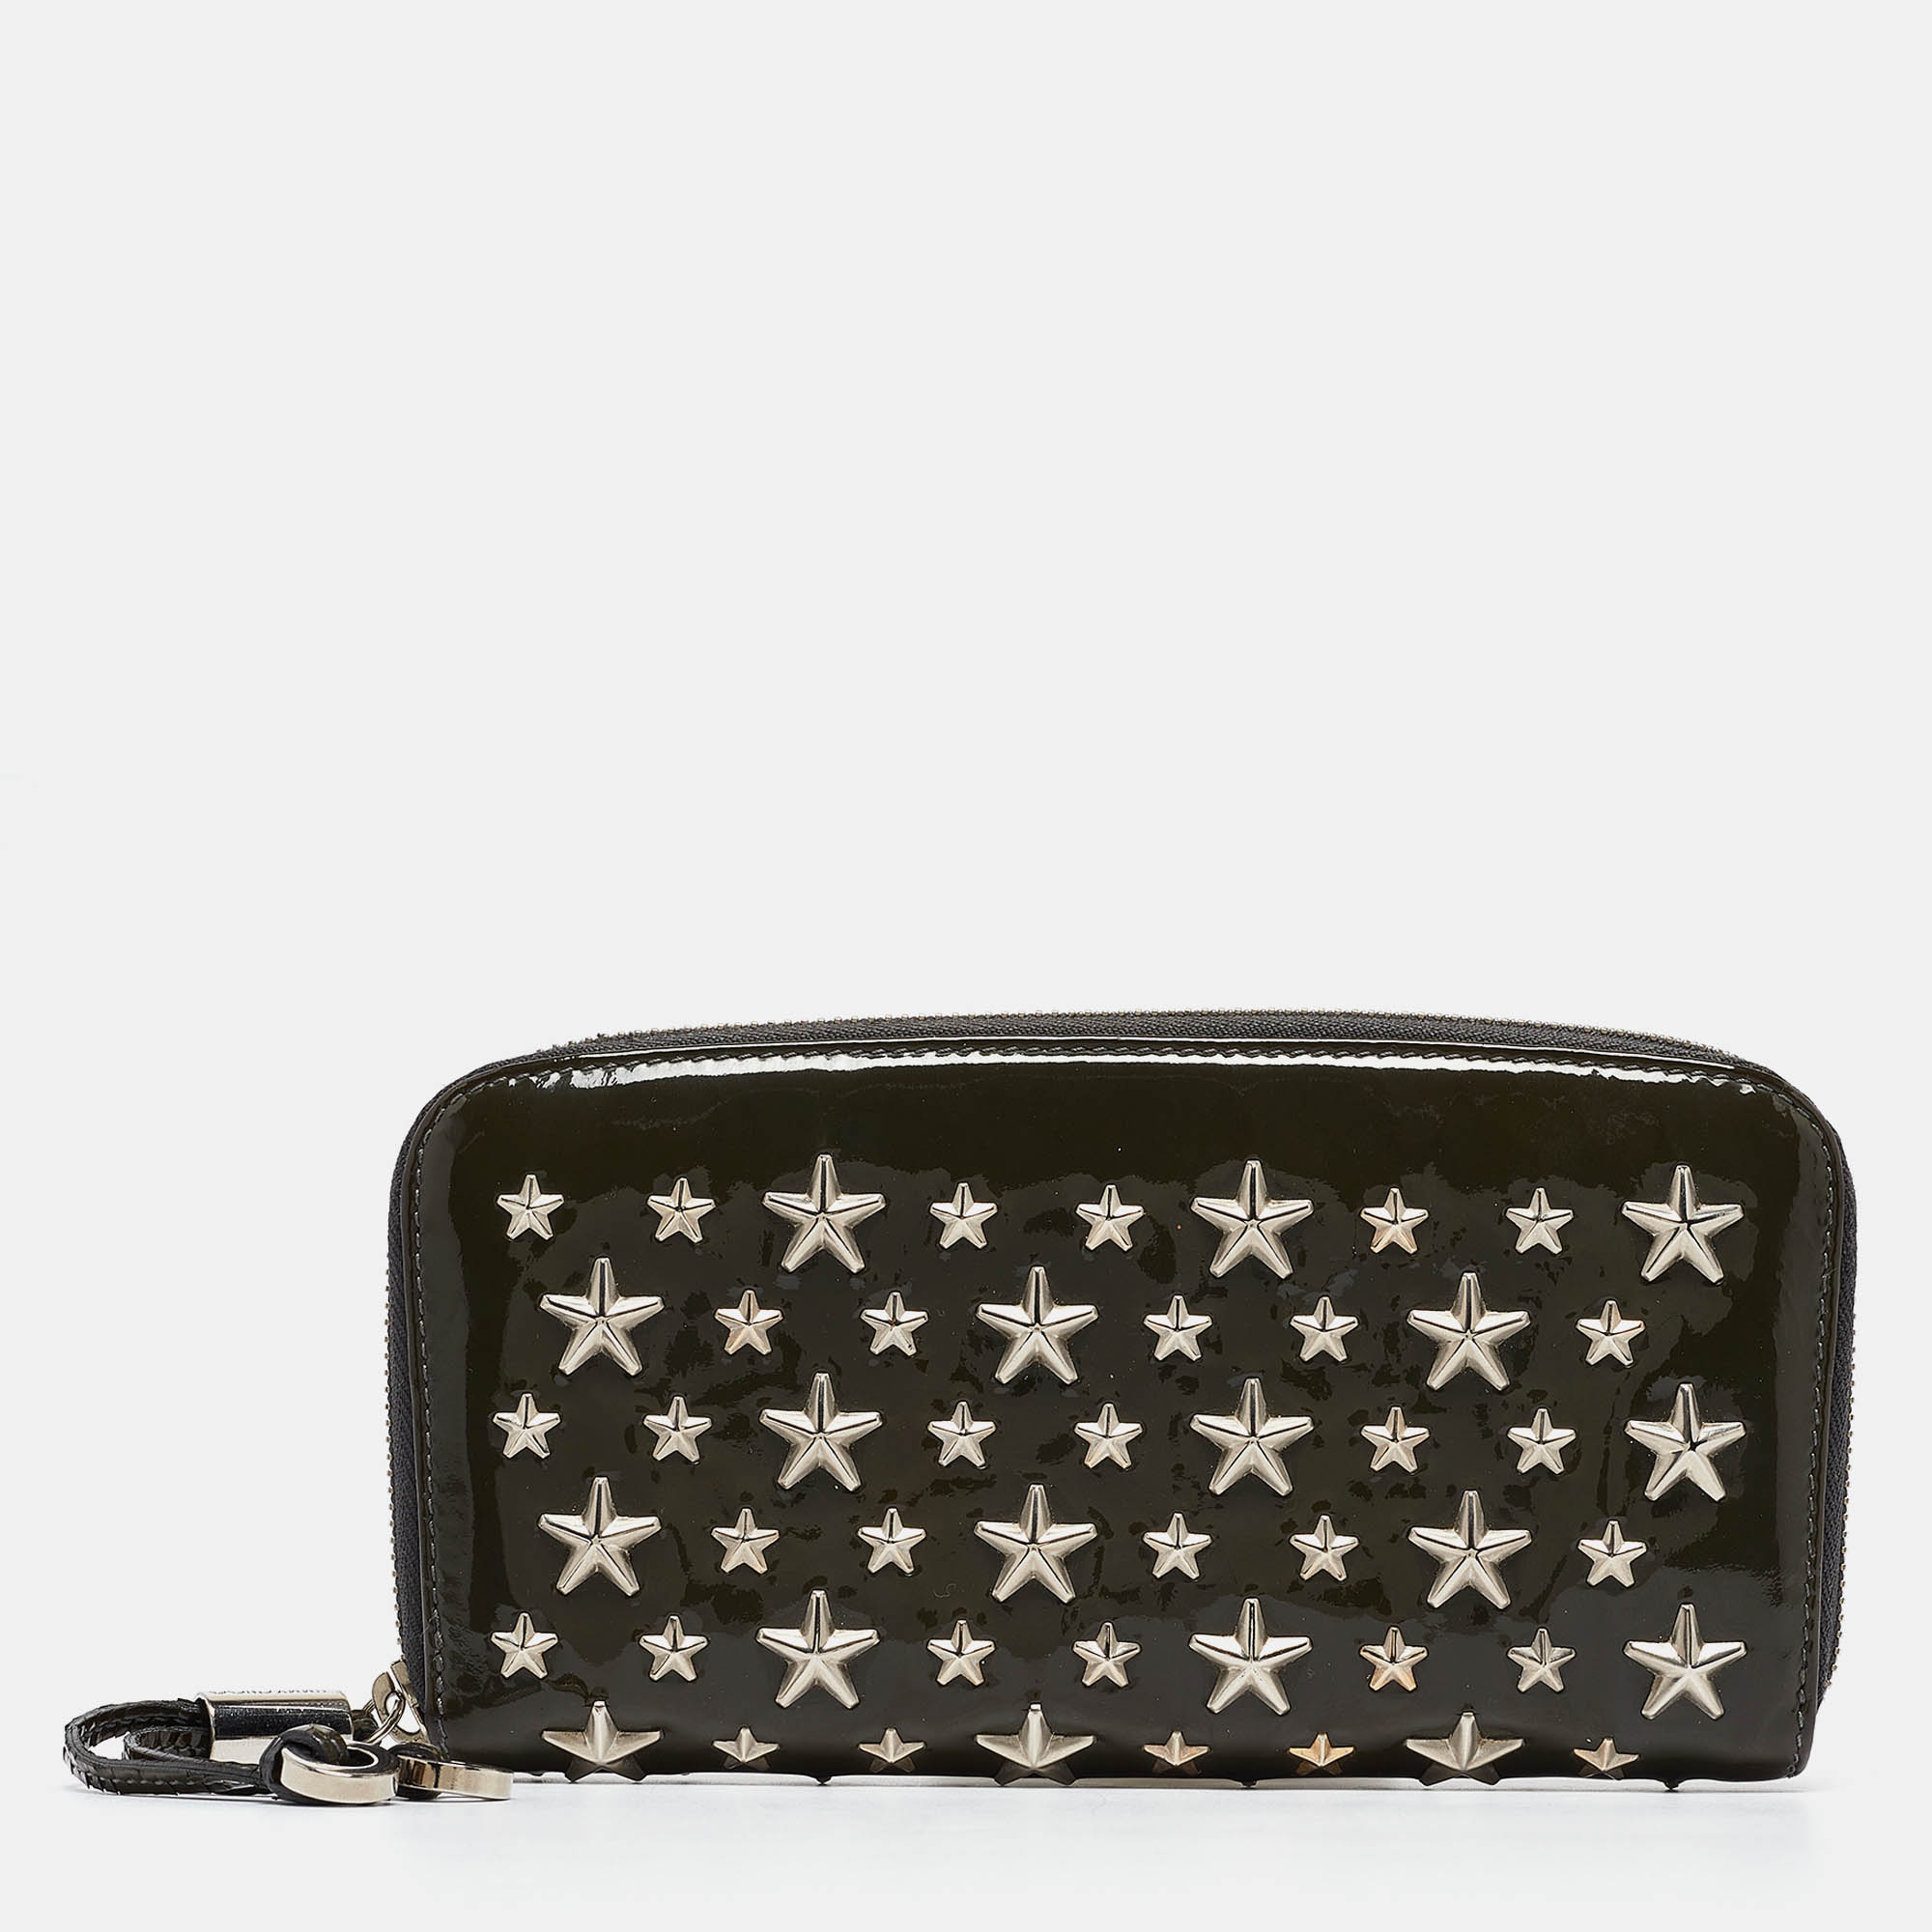 

Jimmy Choo Olive Green Patent Leather Star Studded Zip Around Wallet